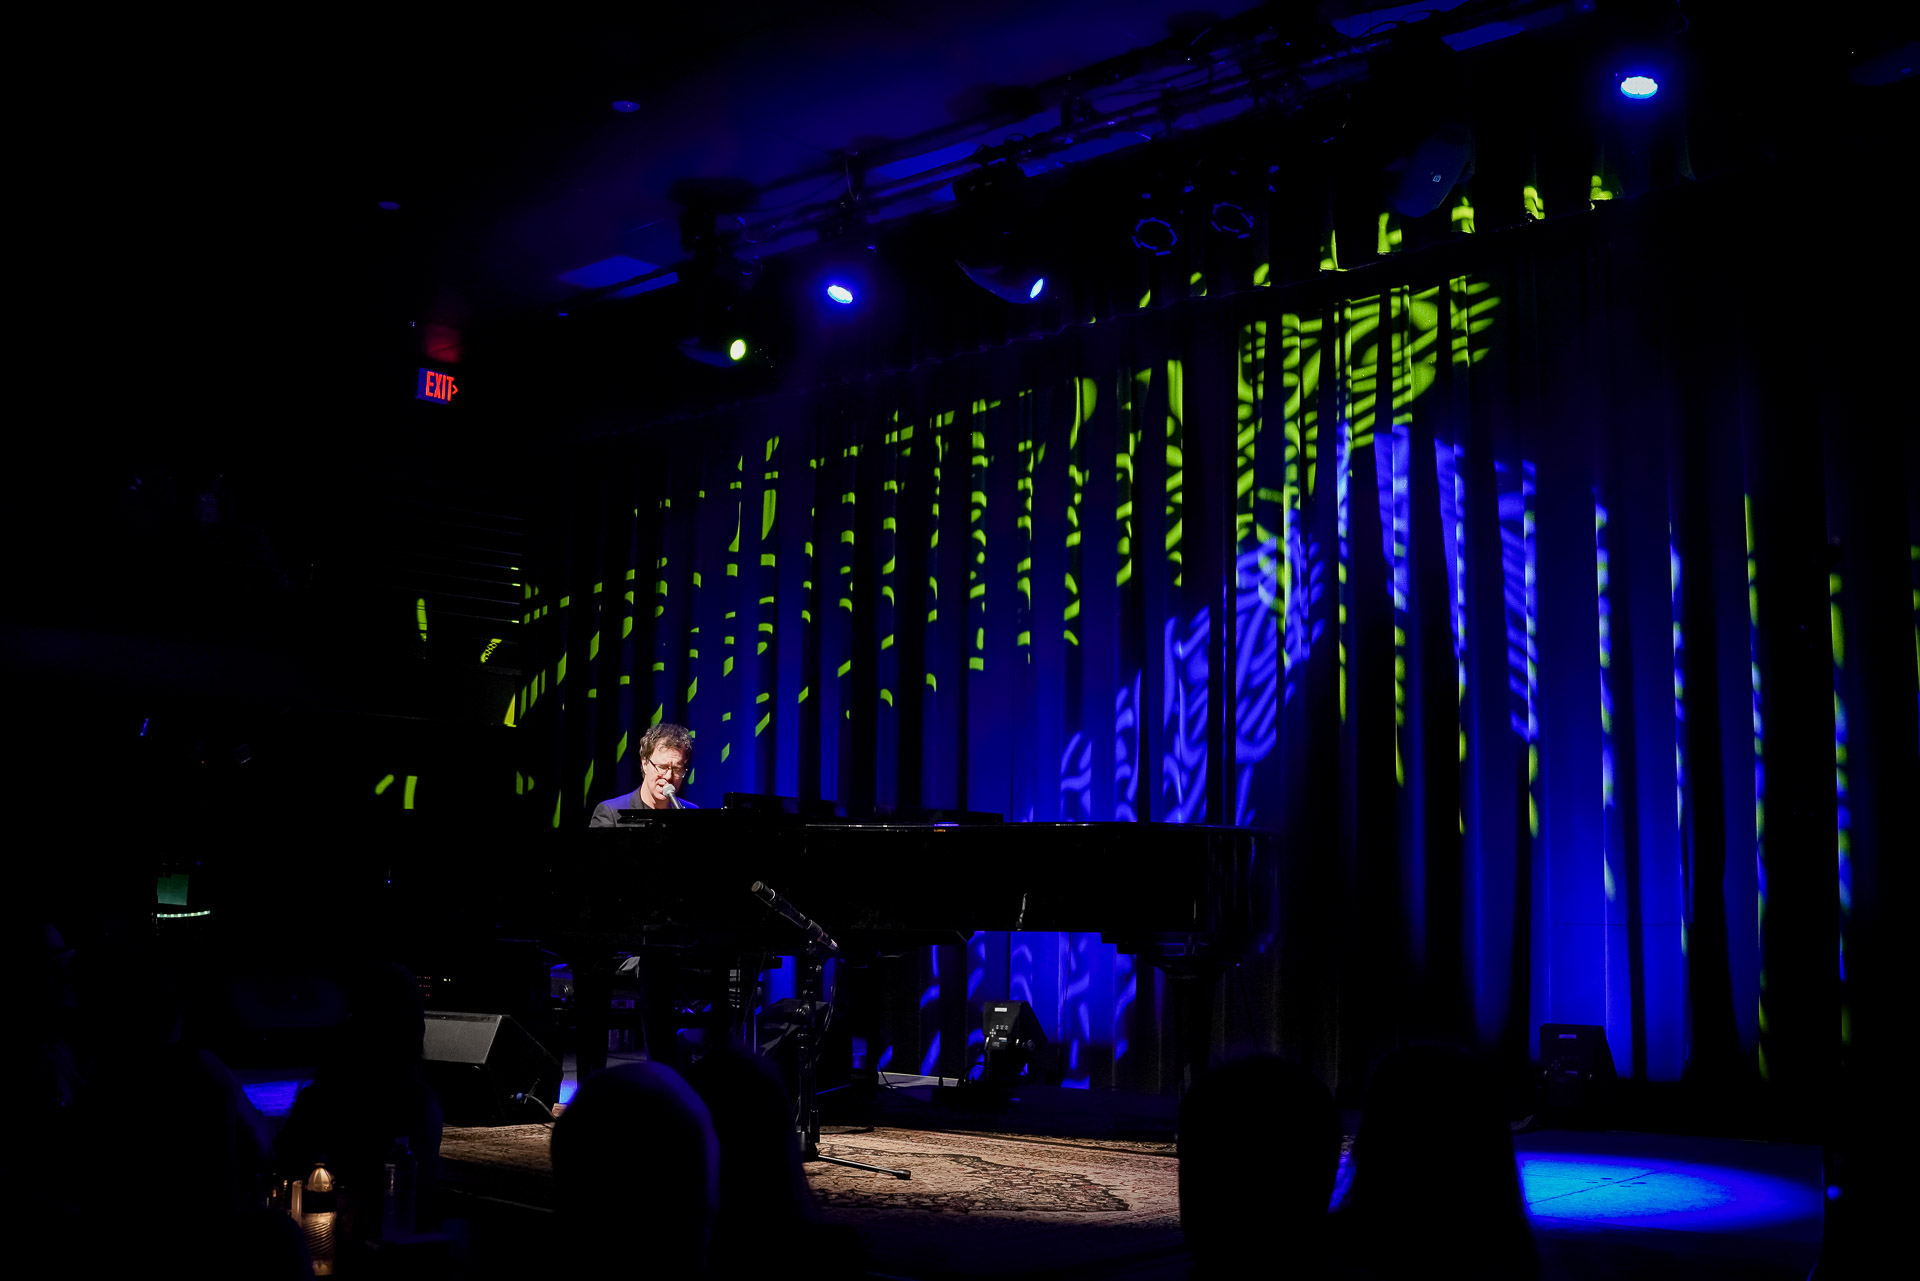 A man playing piano on stage, wider shot